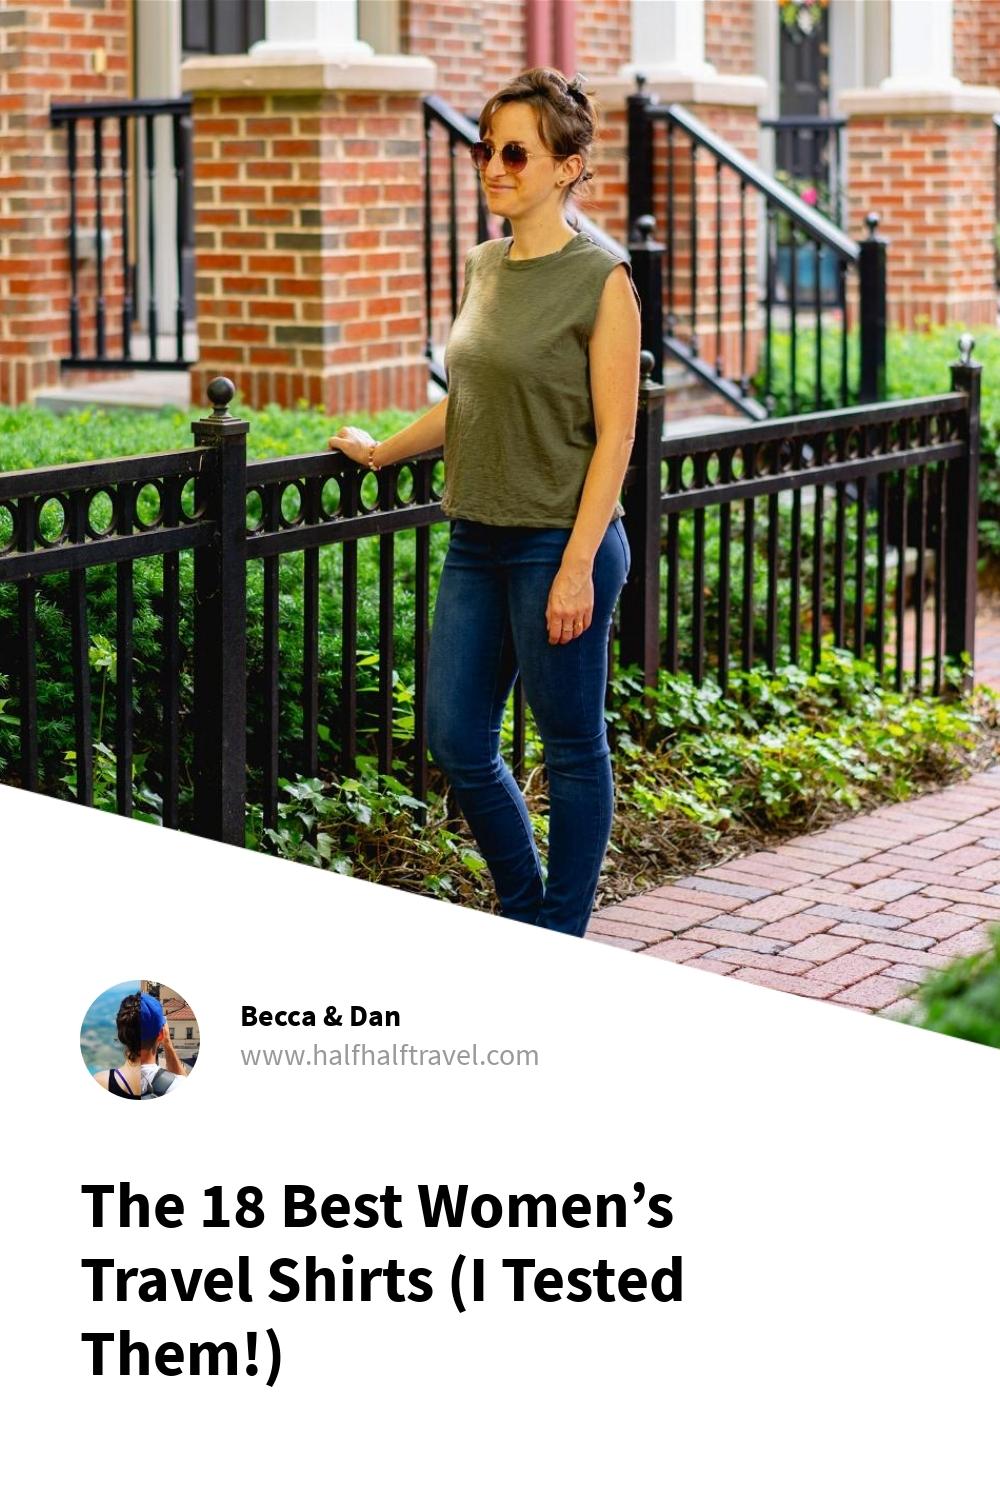 Pinterest image from the 'The 18 Best Women’s Travel Shirts (I tested them!)' article on Half Half Travel